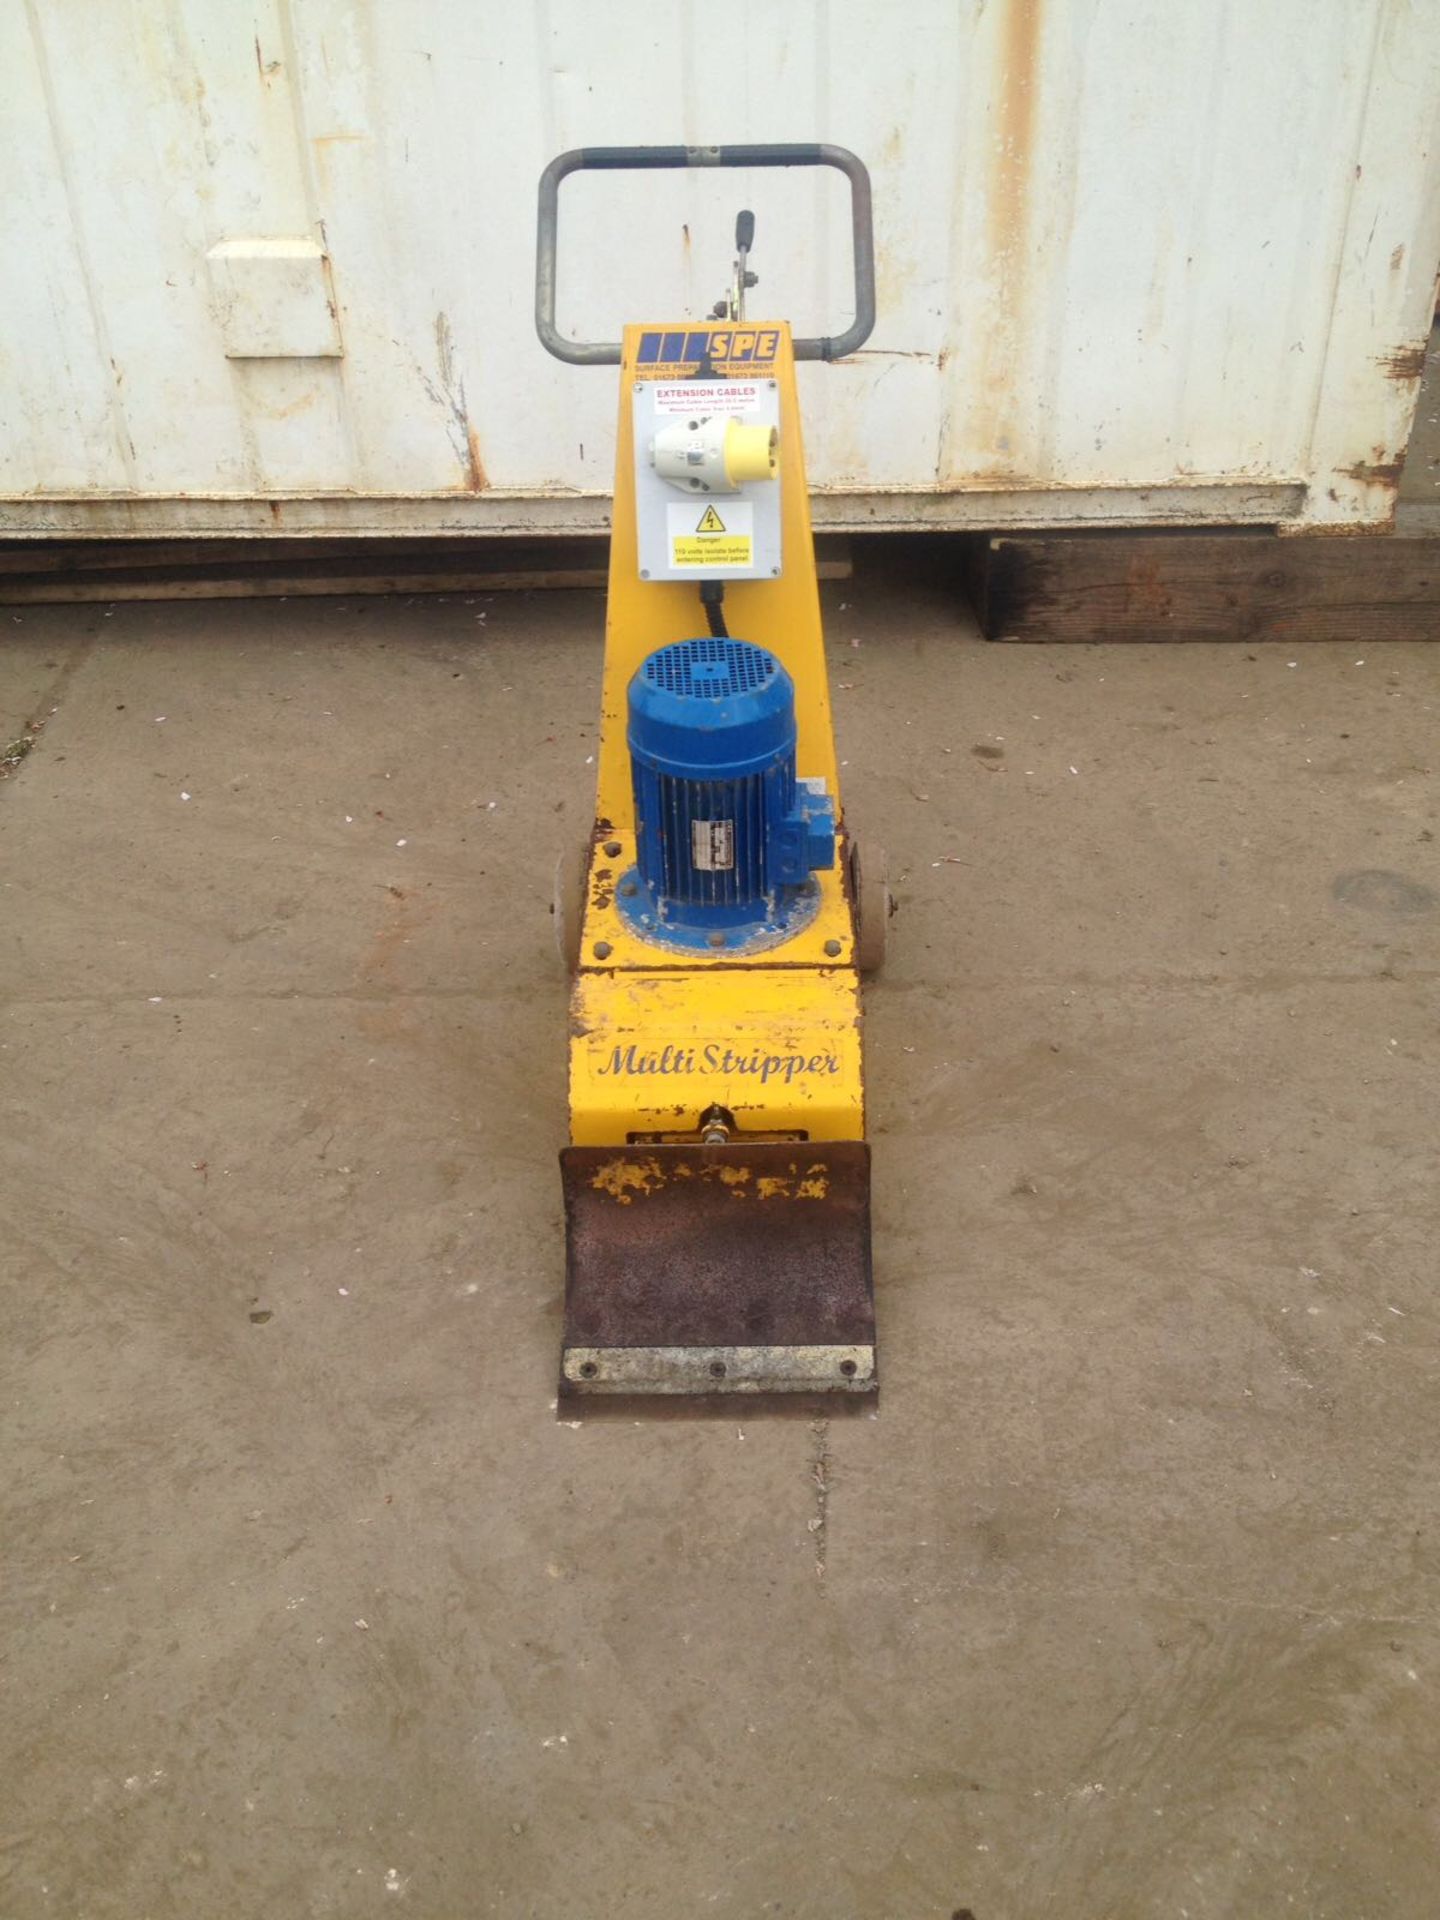 DM - 1X SPE TILE LIFTER, MODEL MS330-1 *PLUS VAT*   110V   COLLECTION / VIEWING FROM CASTLEFORD - Image 2 of 3